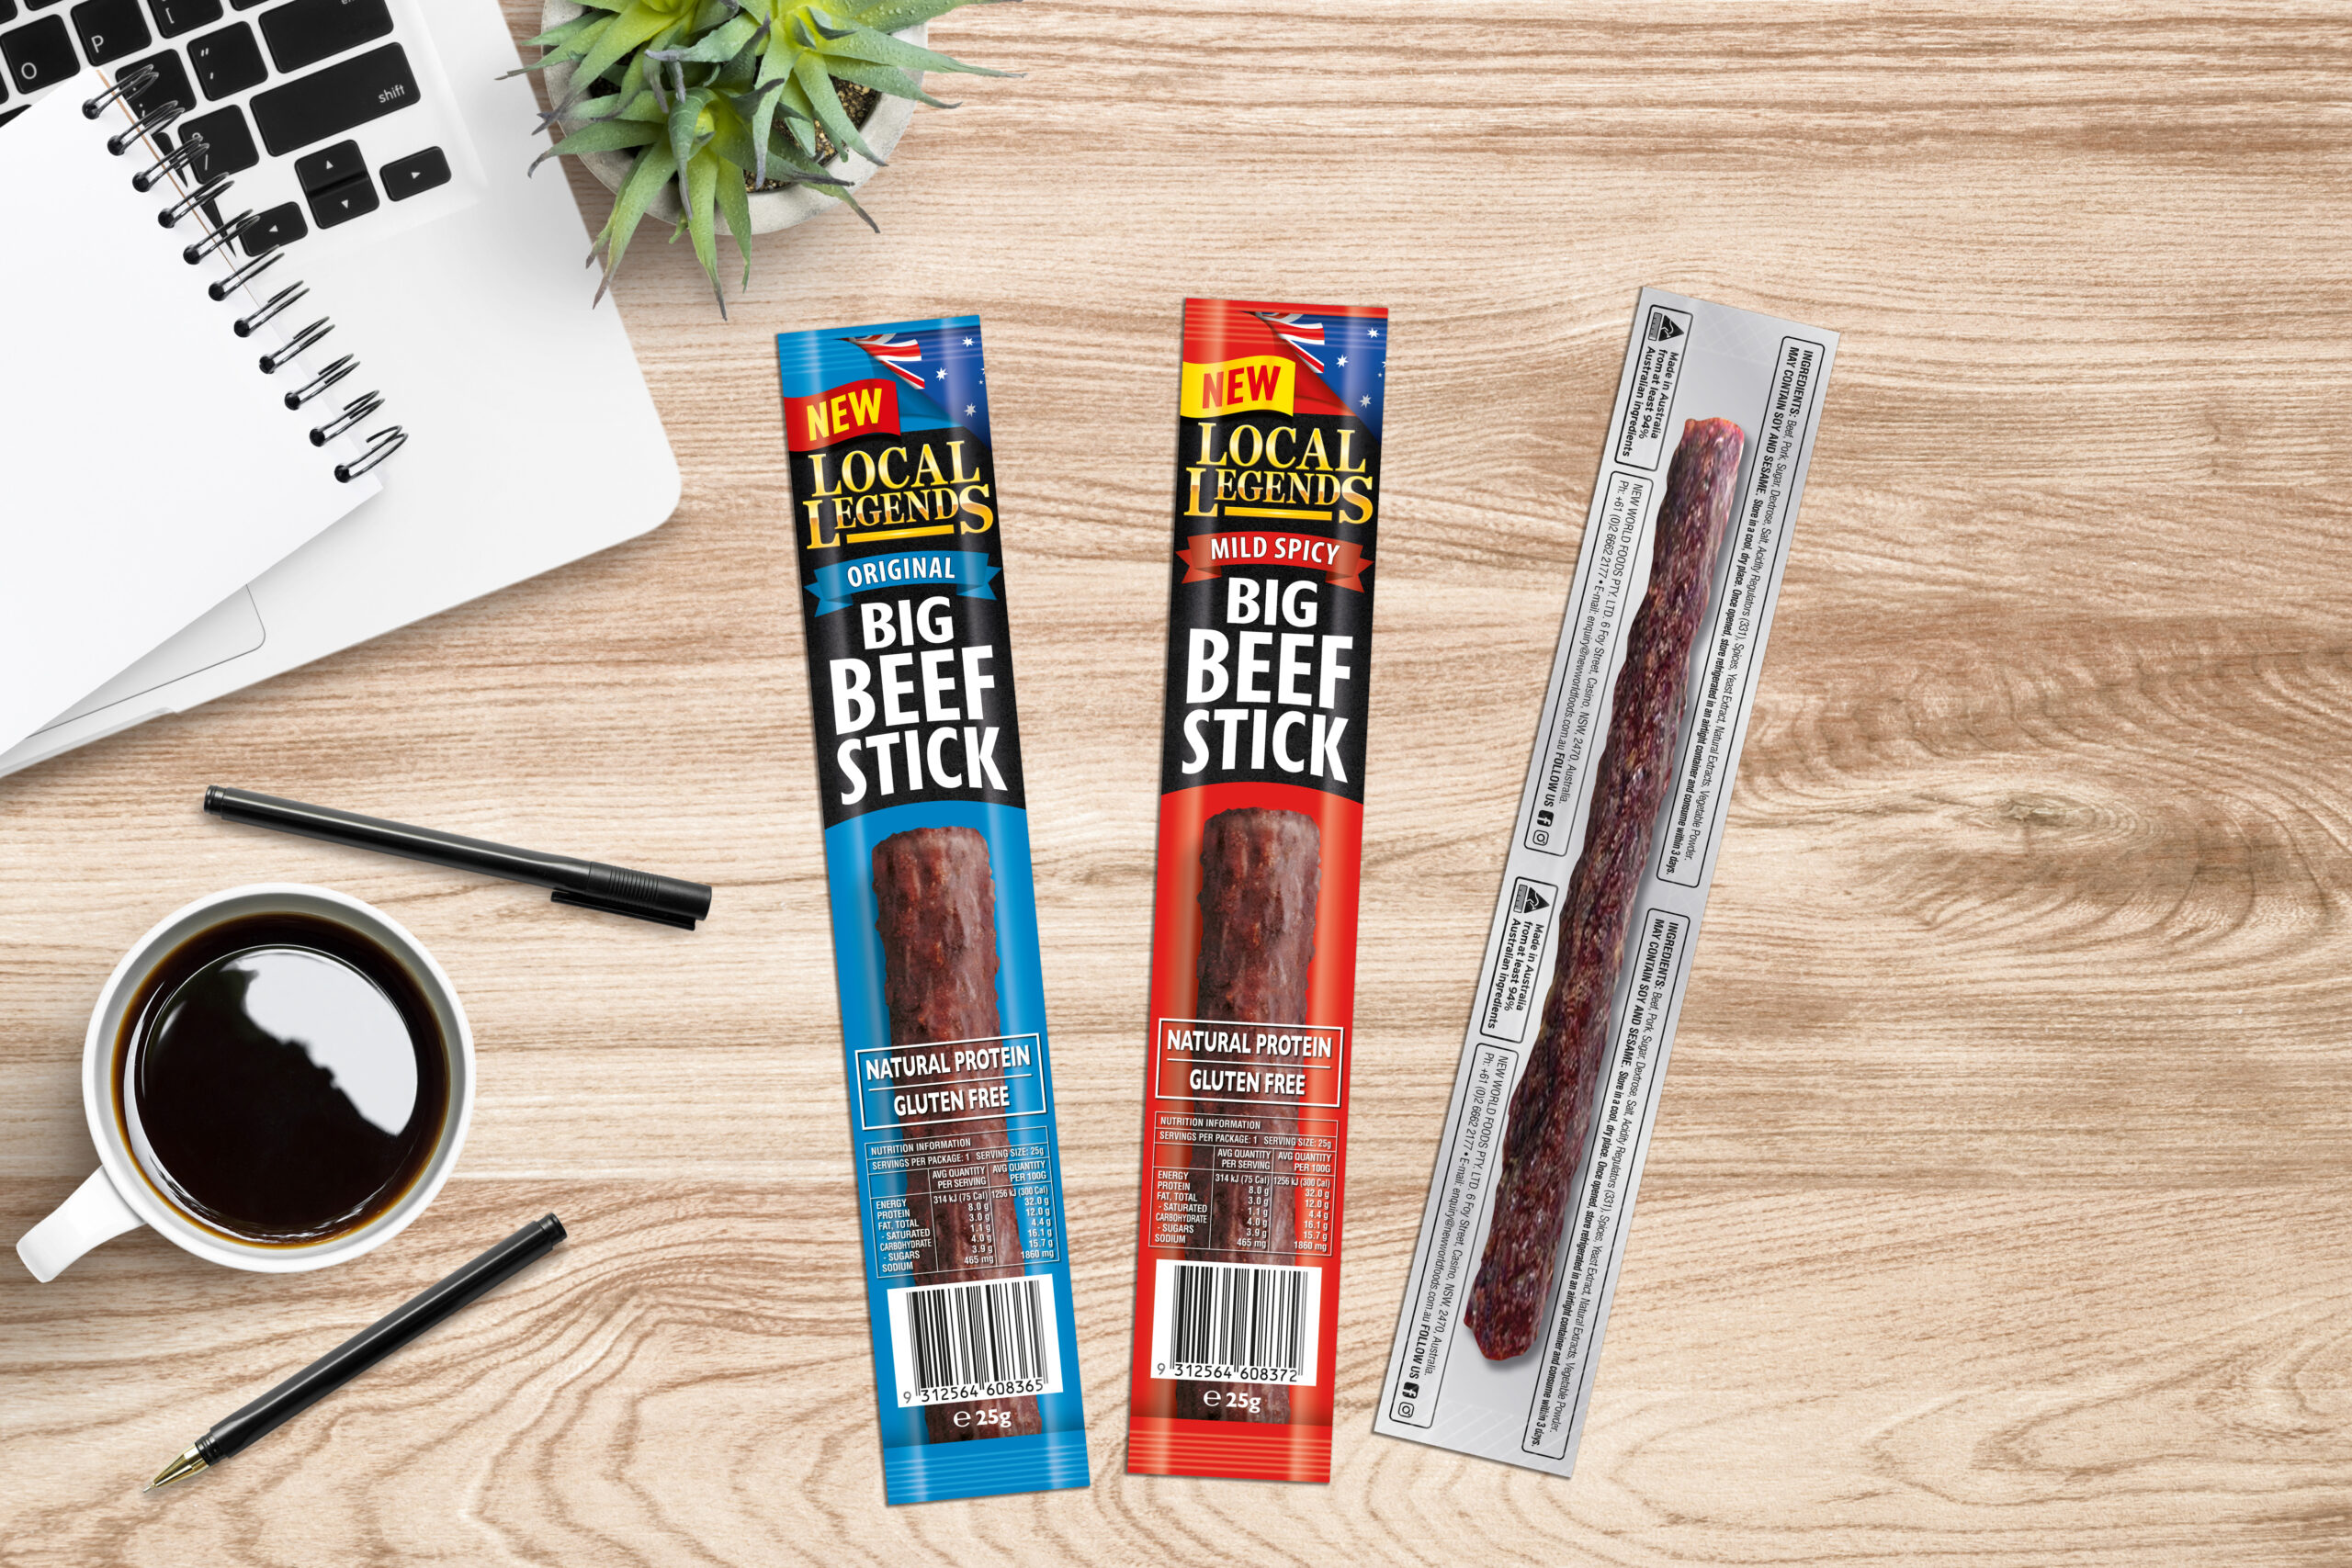 &amp;quot;Big Beef Sticks&amp;quot; Launched! - New World Foods